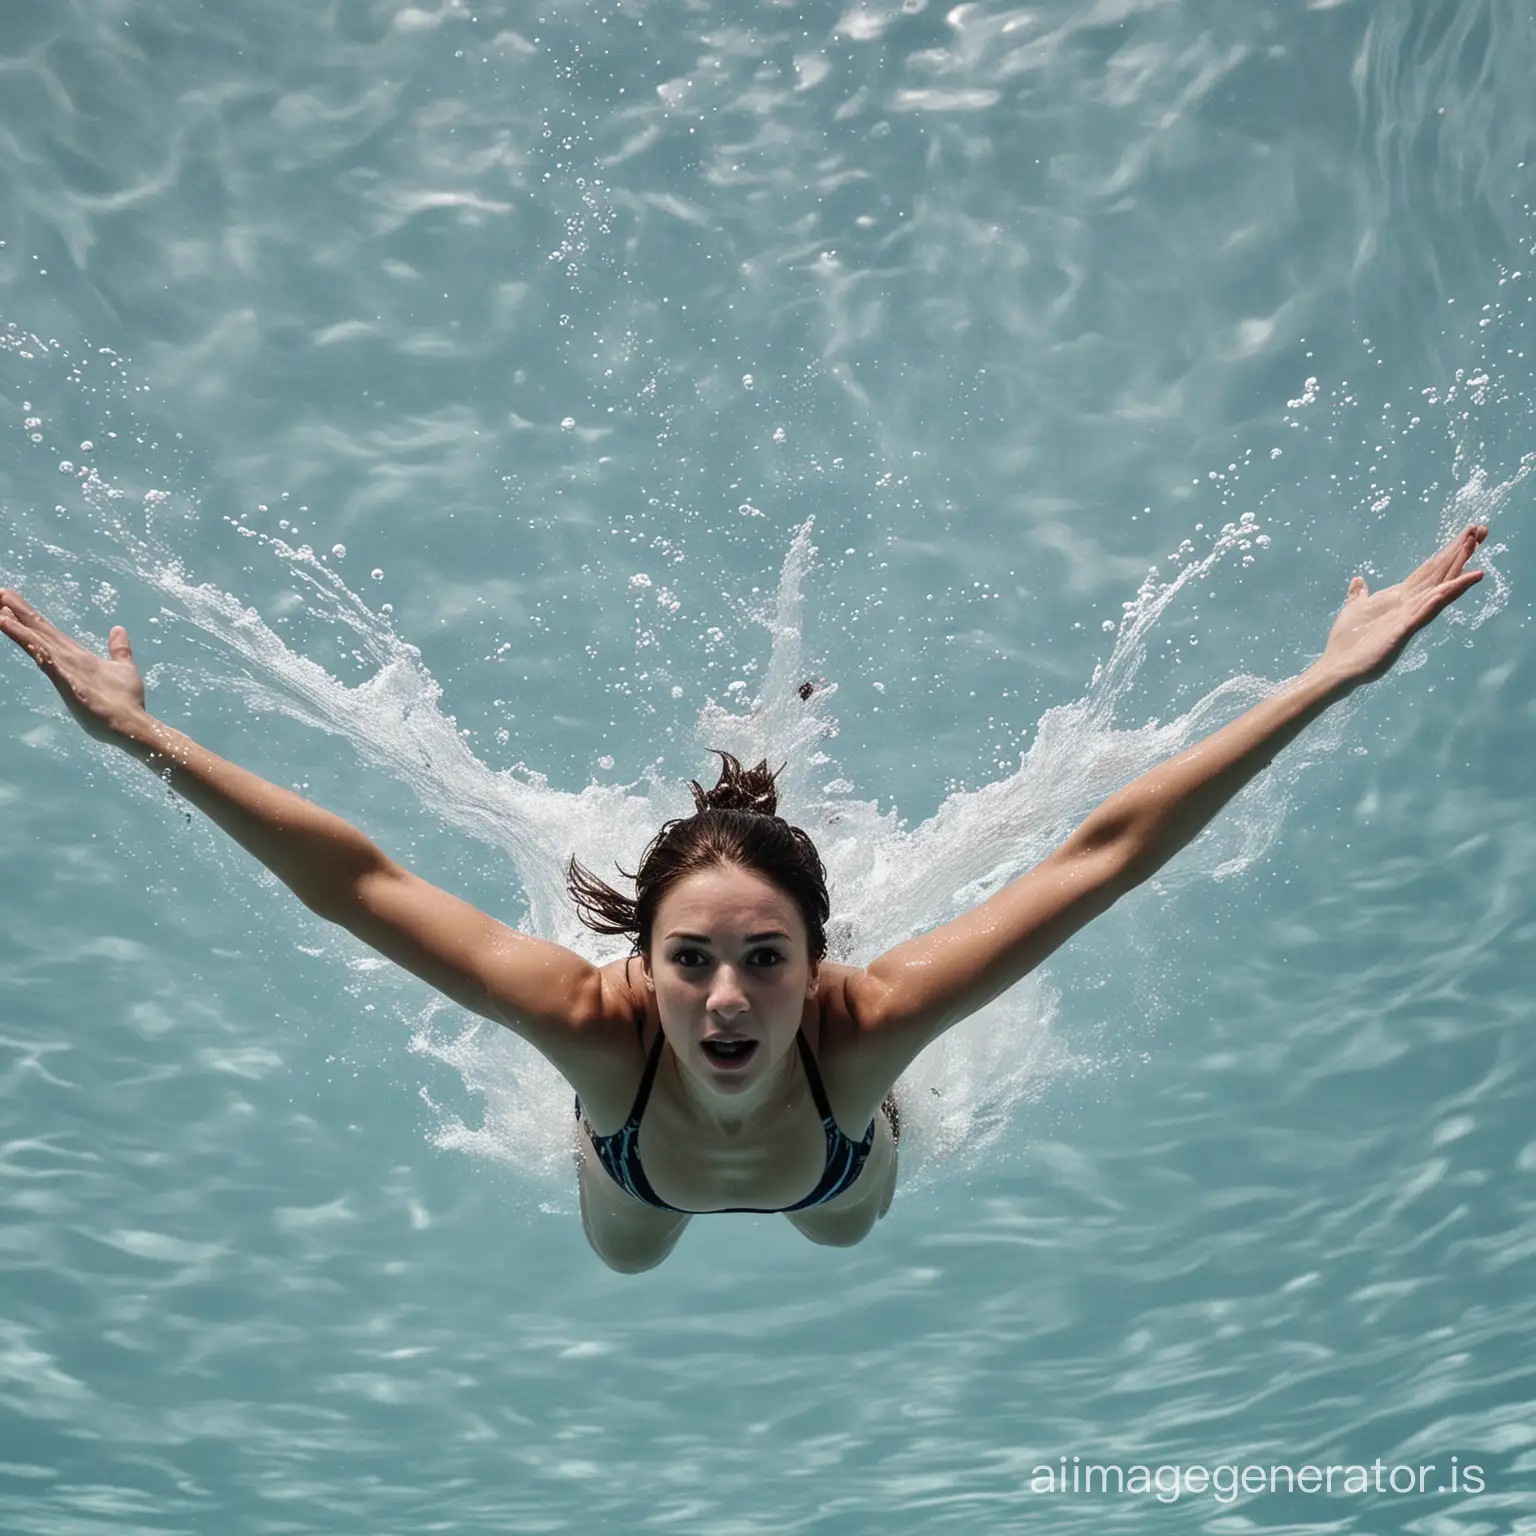 Underwater-View-of-Female-Swimmer-in-Action